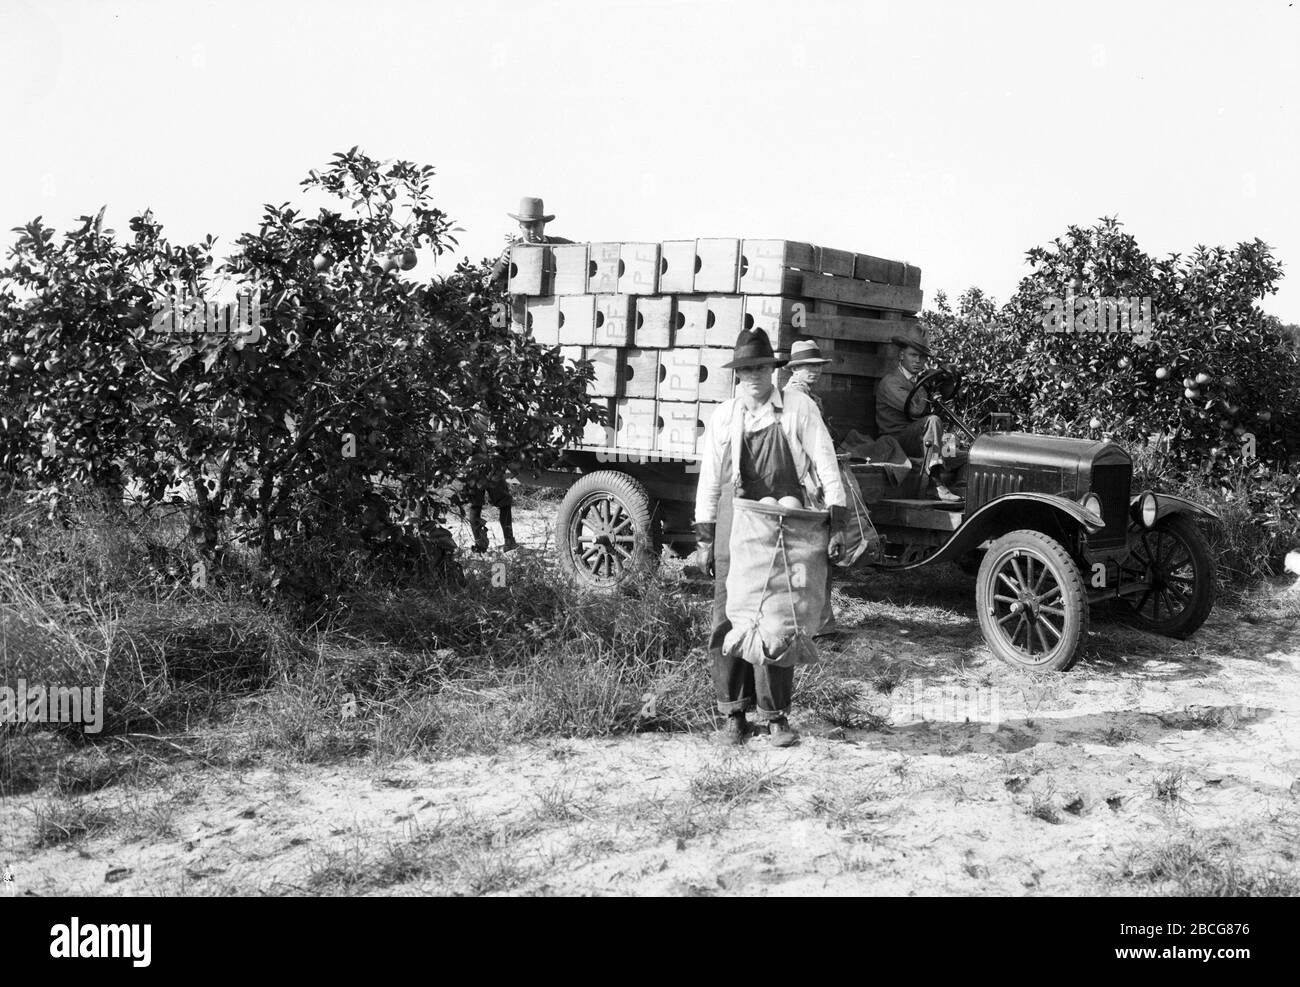 A male fruit picker wears a picking bag full of grapefruit, while other men load crates onto a truck in a grapefruit grove, Florida, 1920s. (Photo by Burton Holmes) Stock Photo